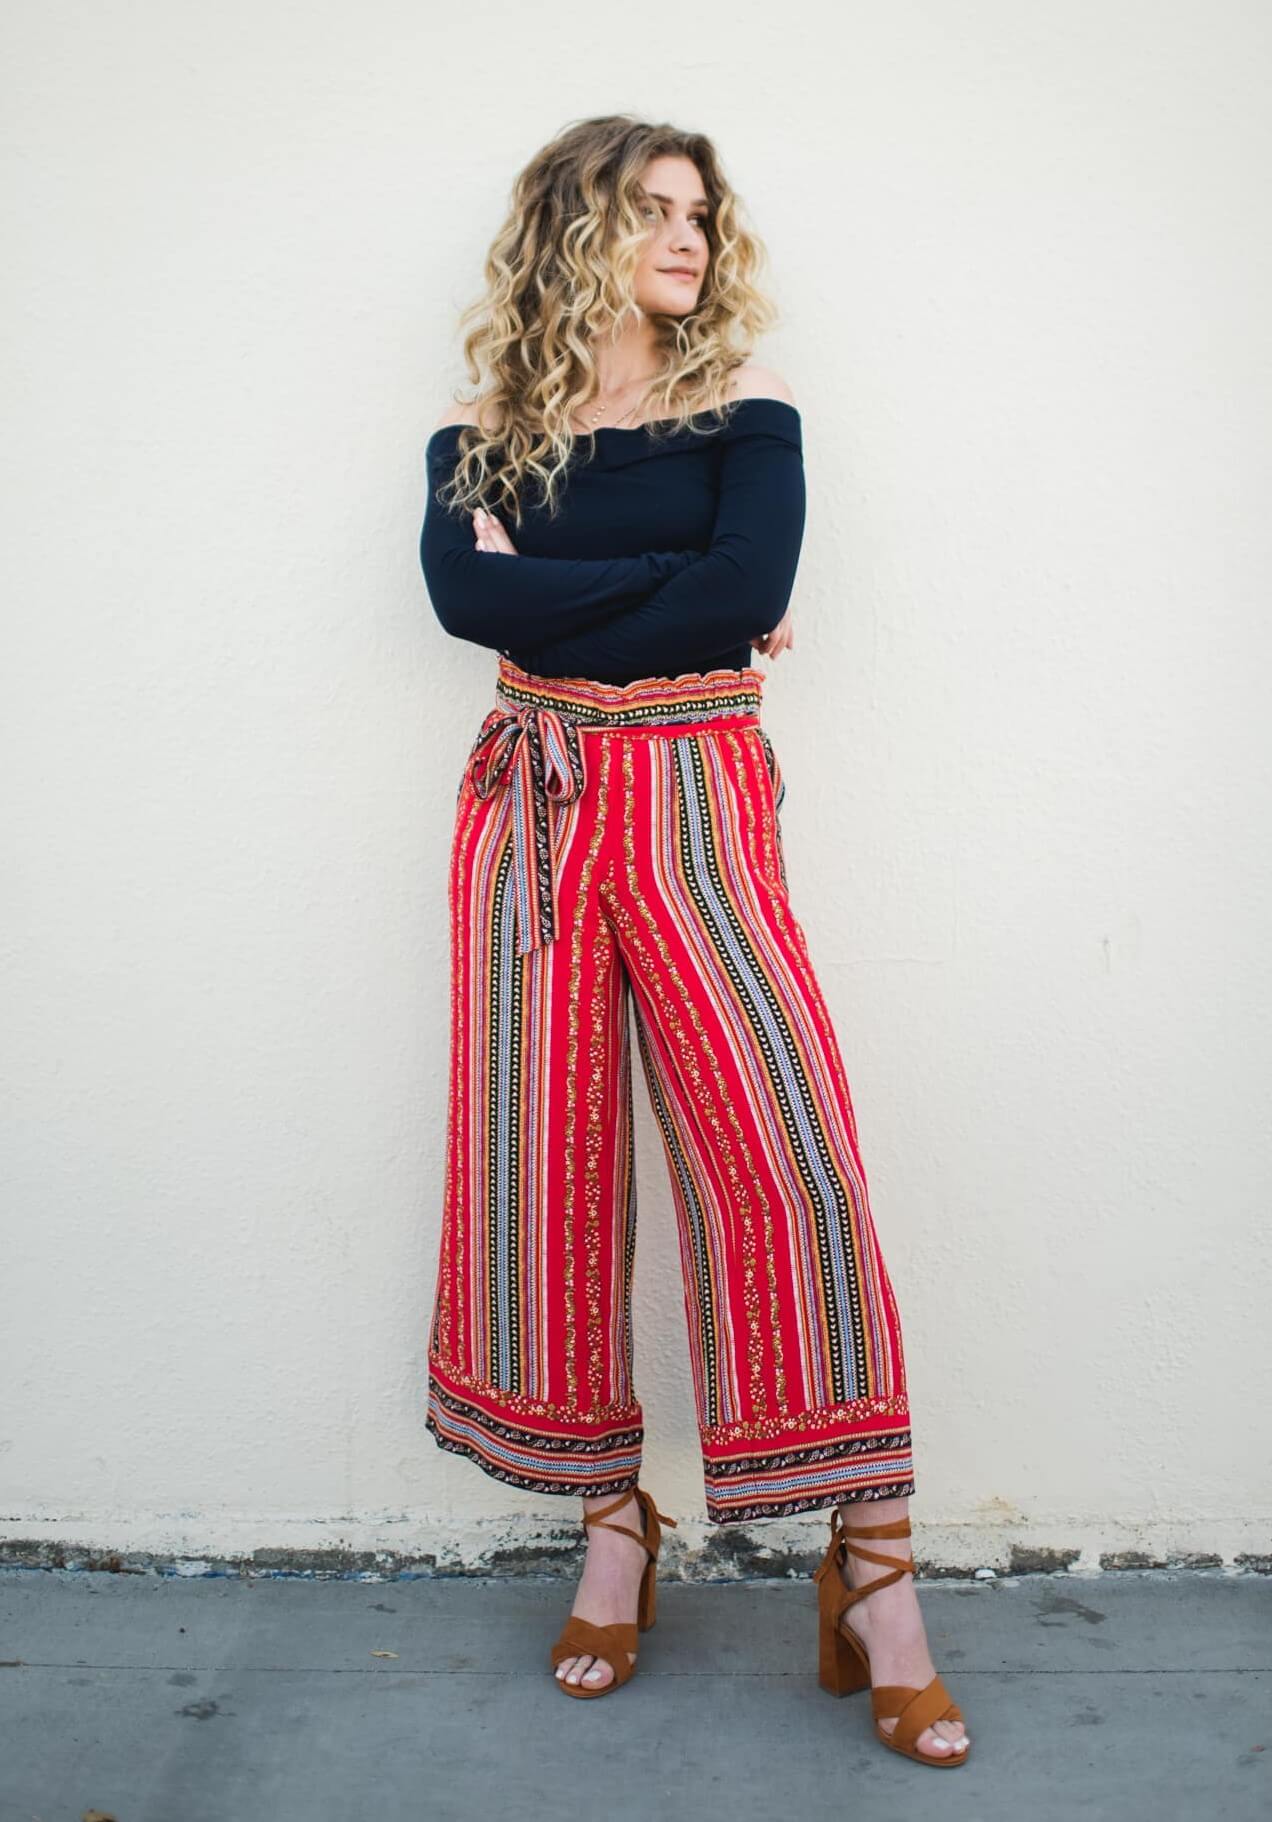 Bohemian Dreams - Jenna Boyd Looked Like A Glam-gal In Her Jazzy Co-ord Fit